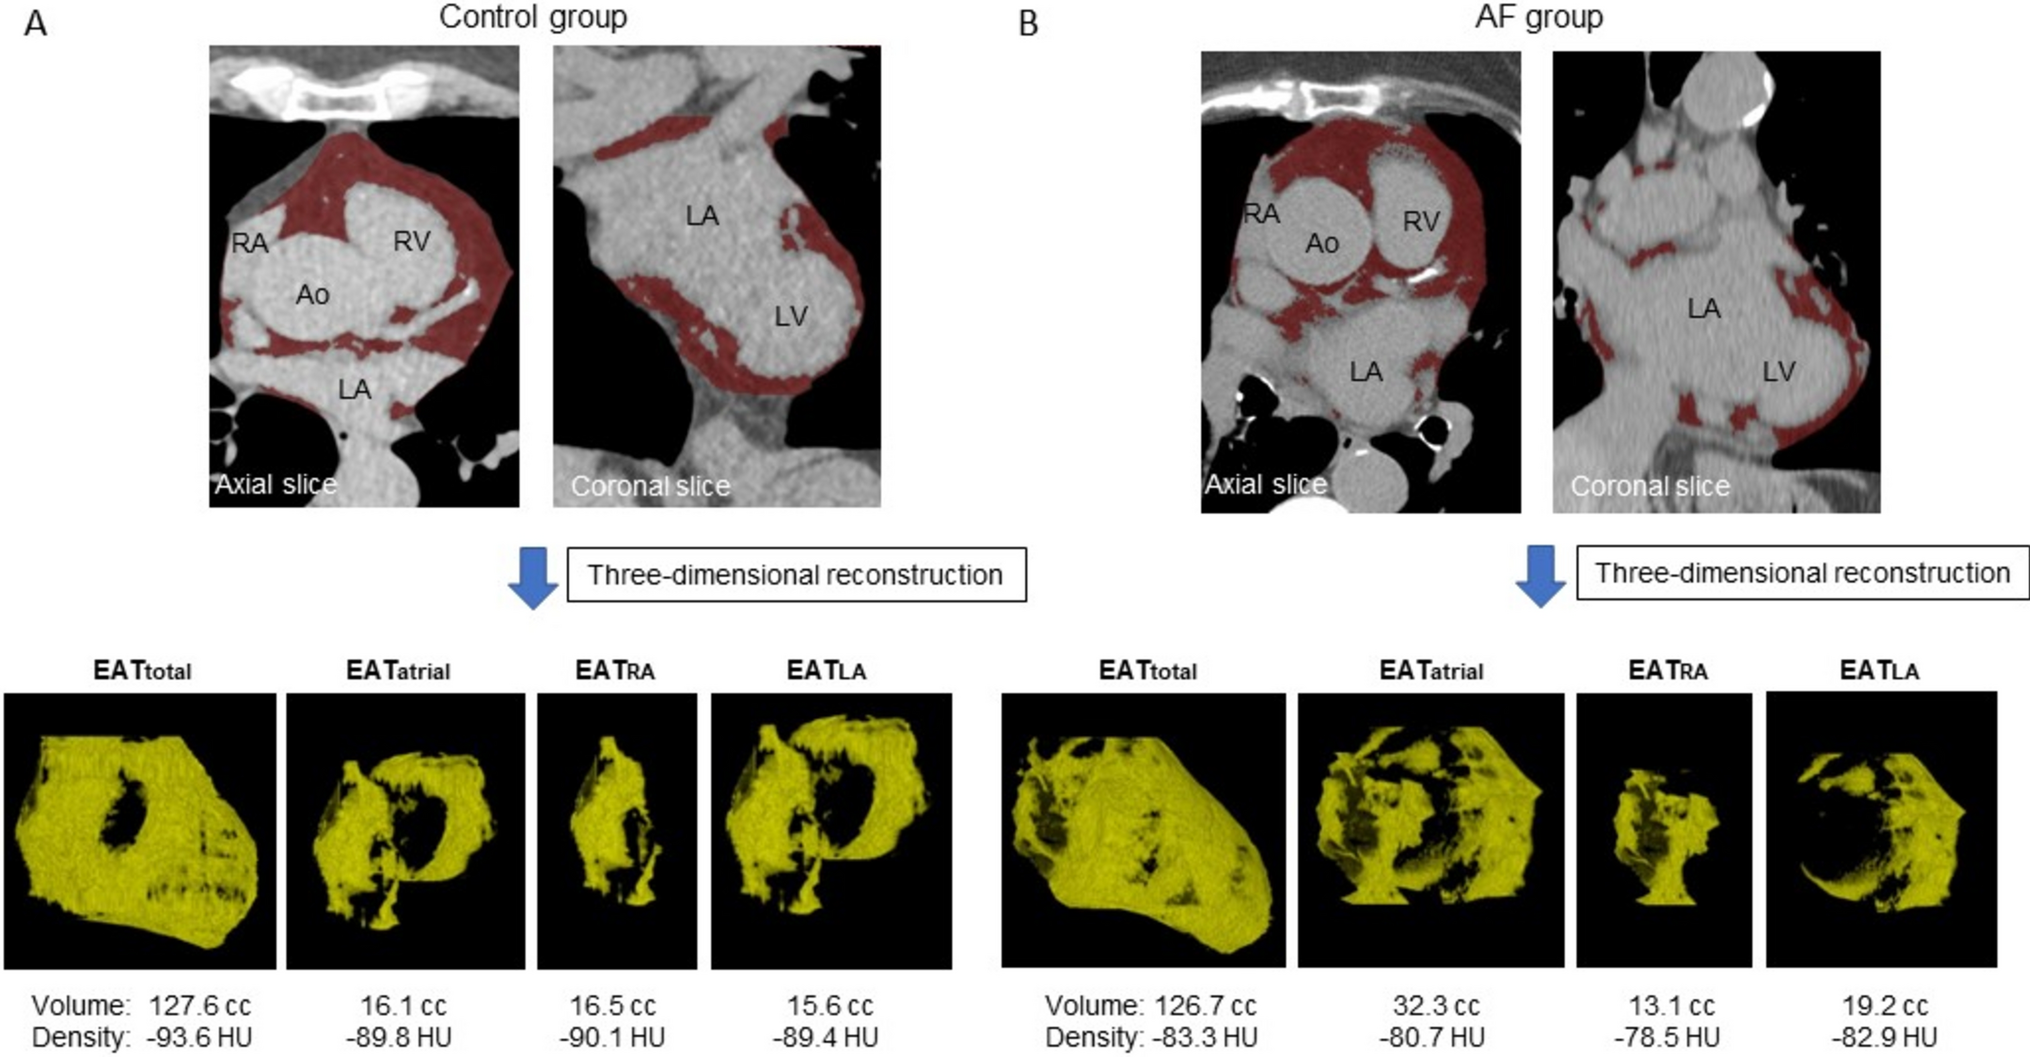 Epicardial adipose tissue density predicts the presence of atrial fibrillation and its recurrence after catheter ablation: three-dimensional reconstructed image analysis